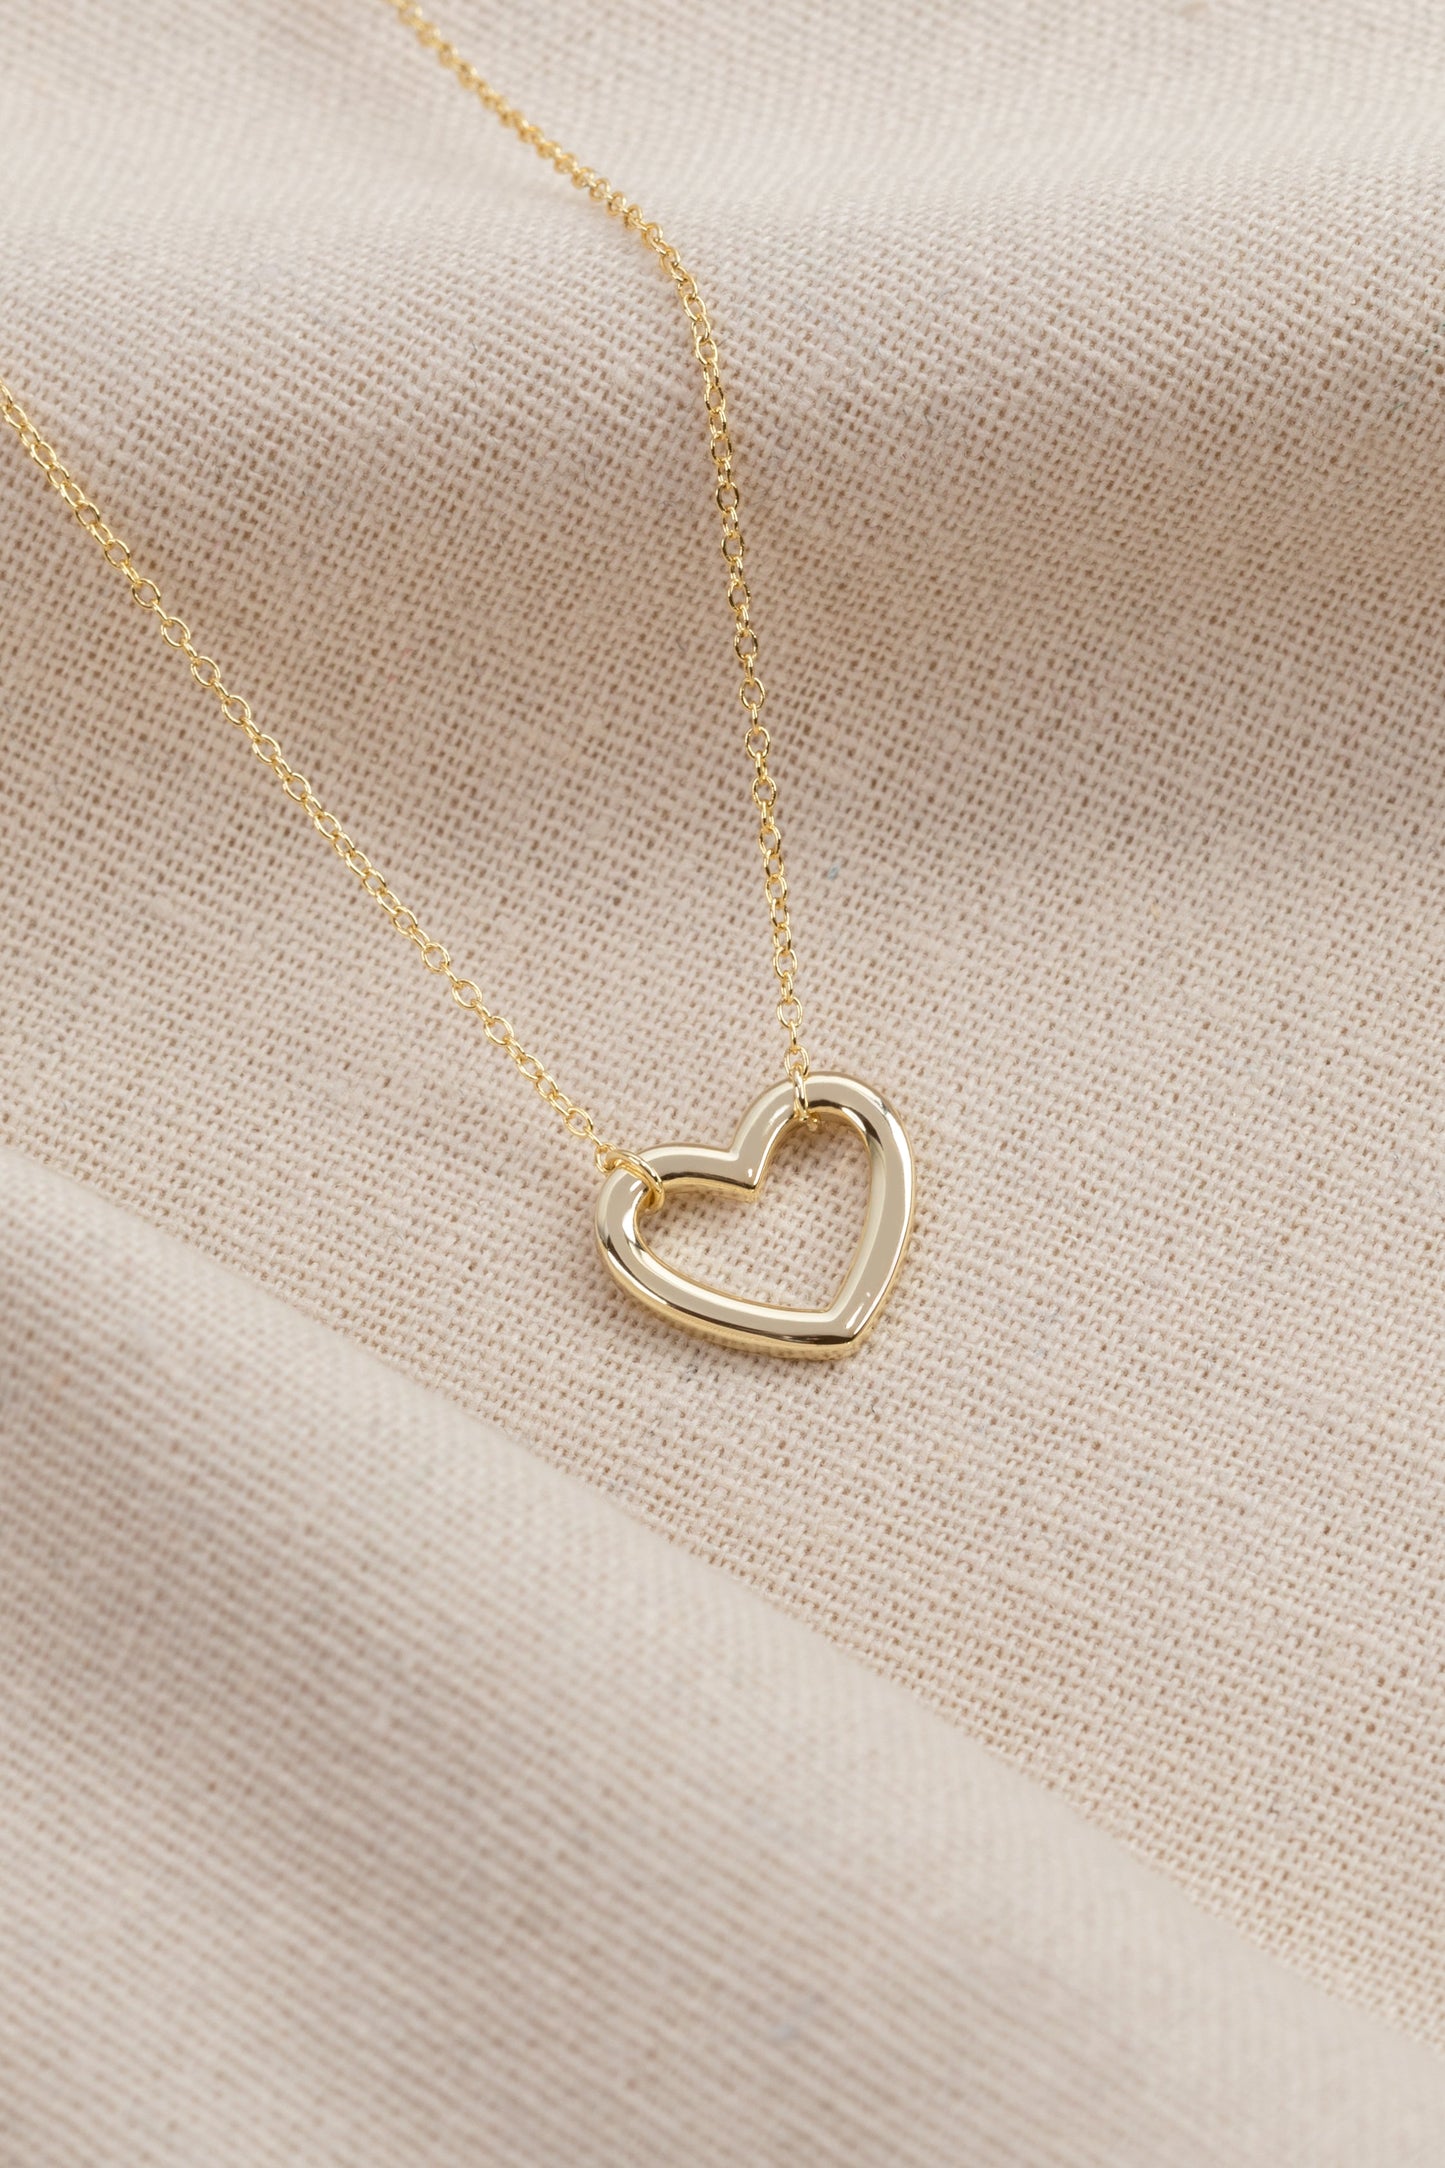 gold plated heart shaped pendant on a gold plated chain . this necklace is on a hessian style material backdrop